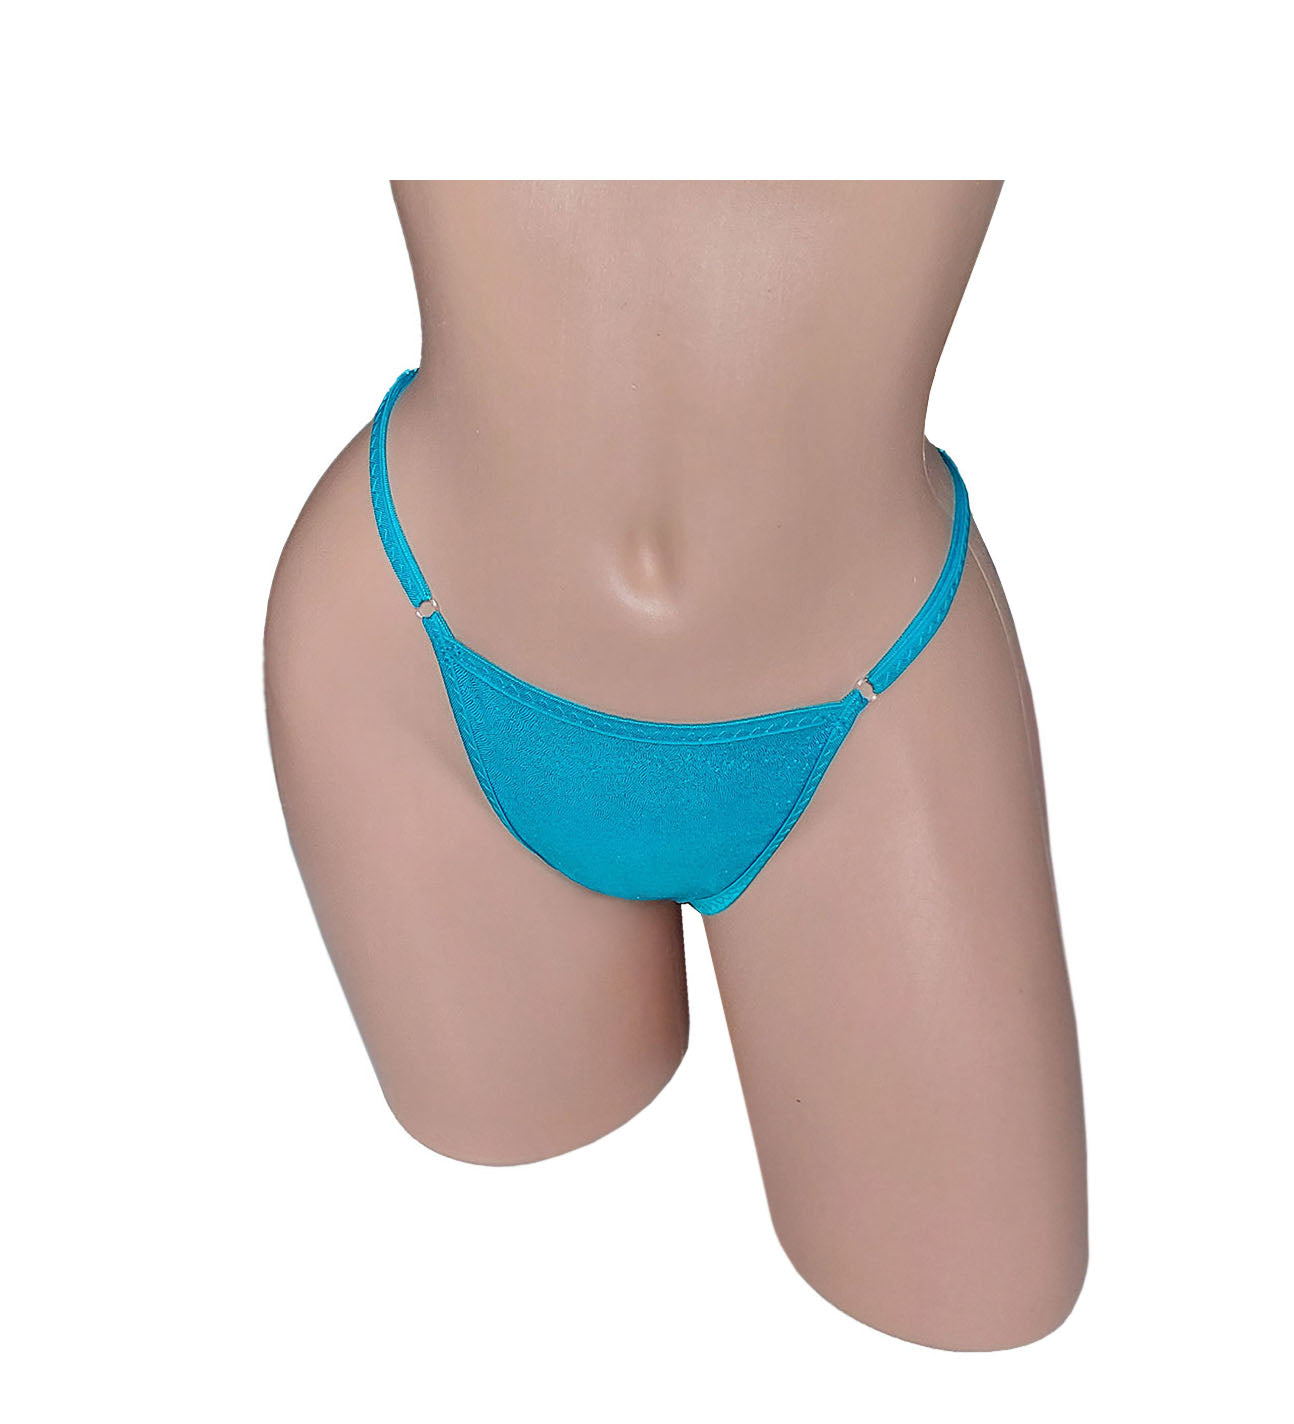 Fantasia Thong - fuller coverage in front & wider in back – my